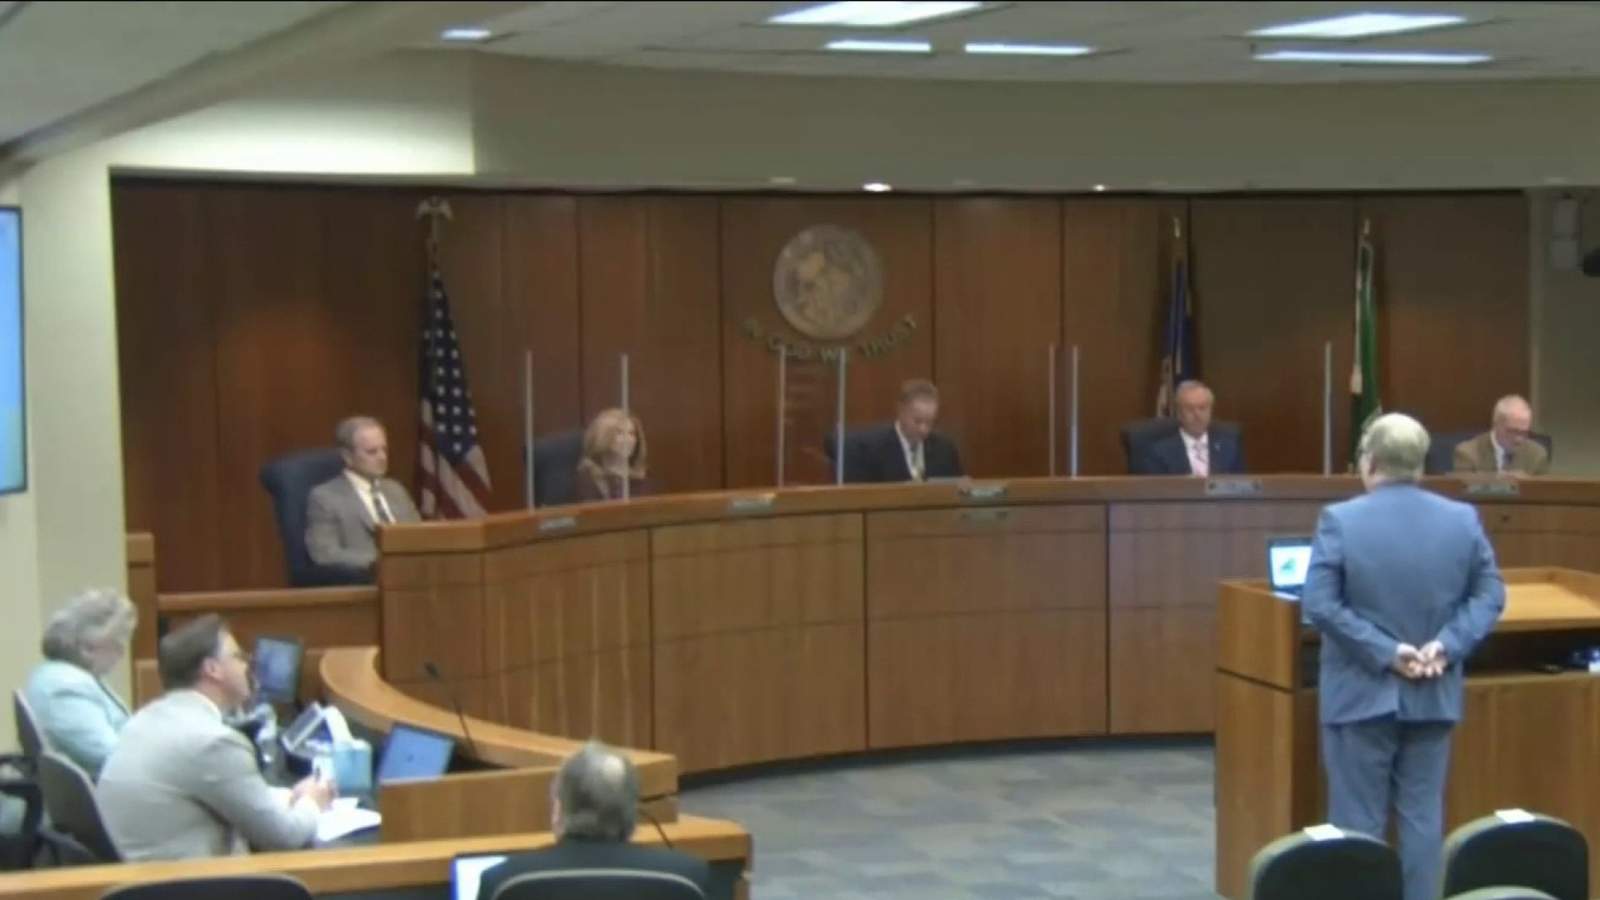 Roanoke County Board of Supervisors discuss budget, school funding and broadband projects